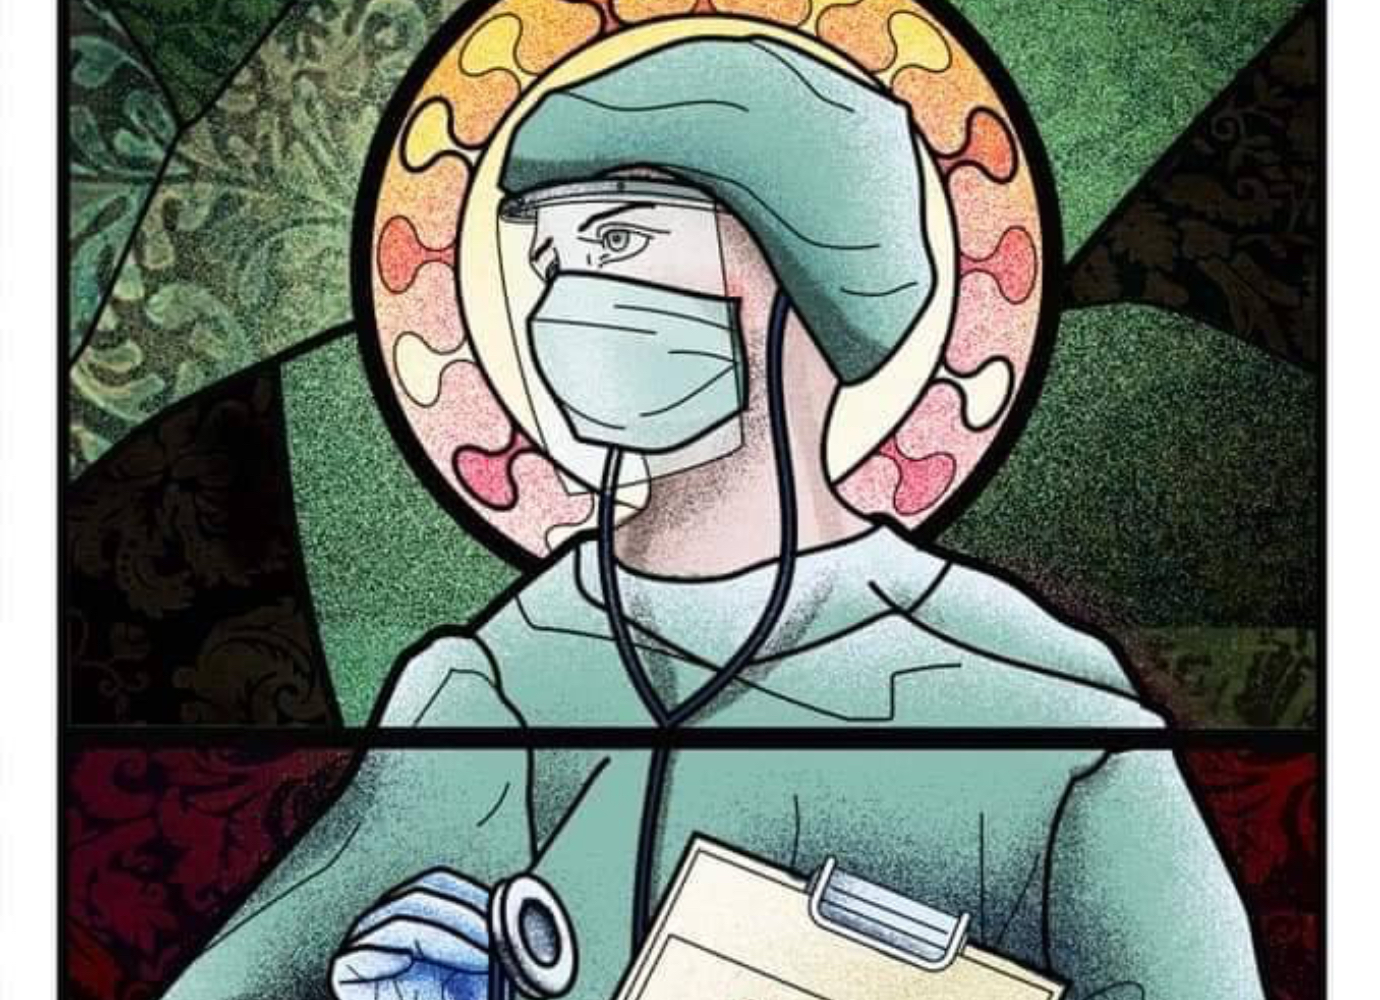 Posters depicting doctors and medical staff as saints deemed ‘satanist’ in Romania